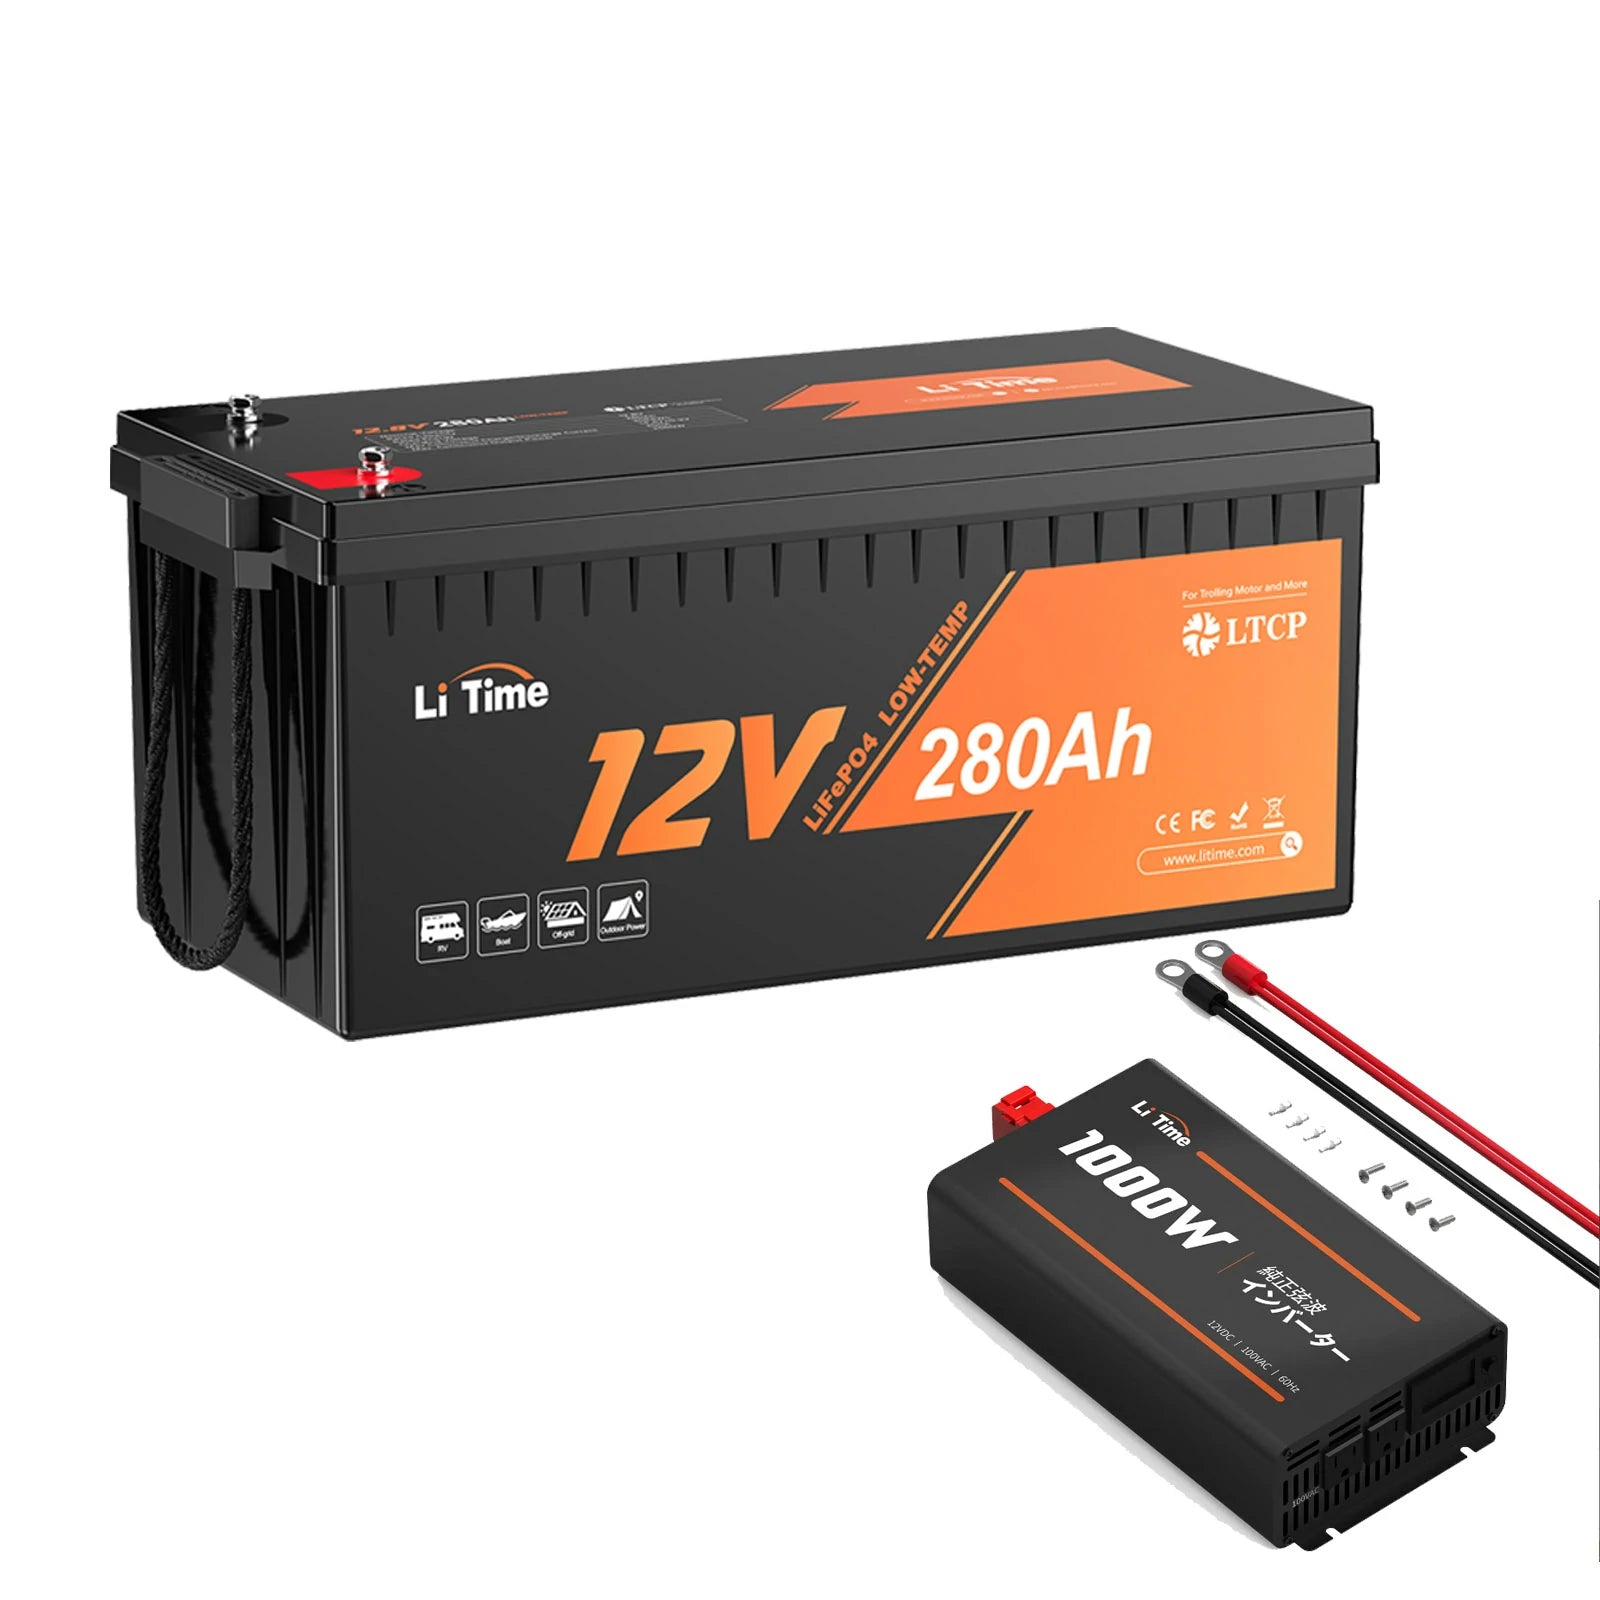 LiTime 12V 280Ah 低温保護付きリン酸鉄リチウムイオンバッテリー 200AのBMS 3584Wh ampere time